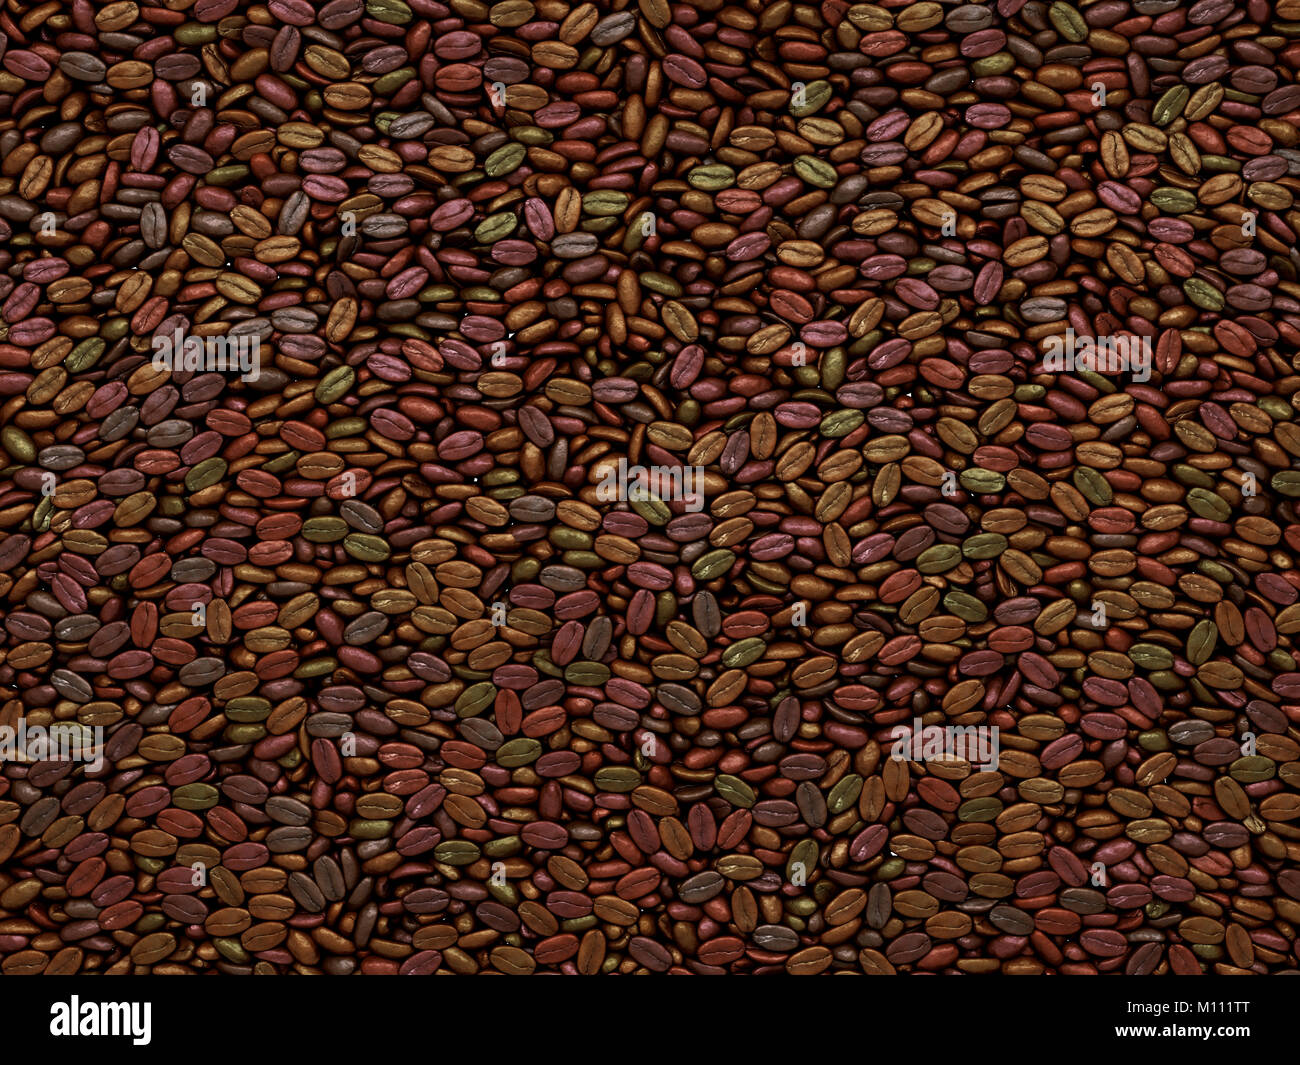 Unsorted Coffee beans texture or background. Large resolution Stock Photo